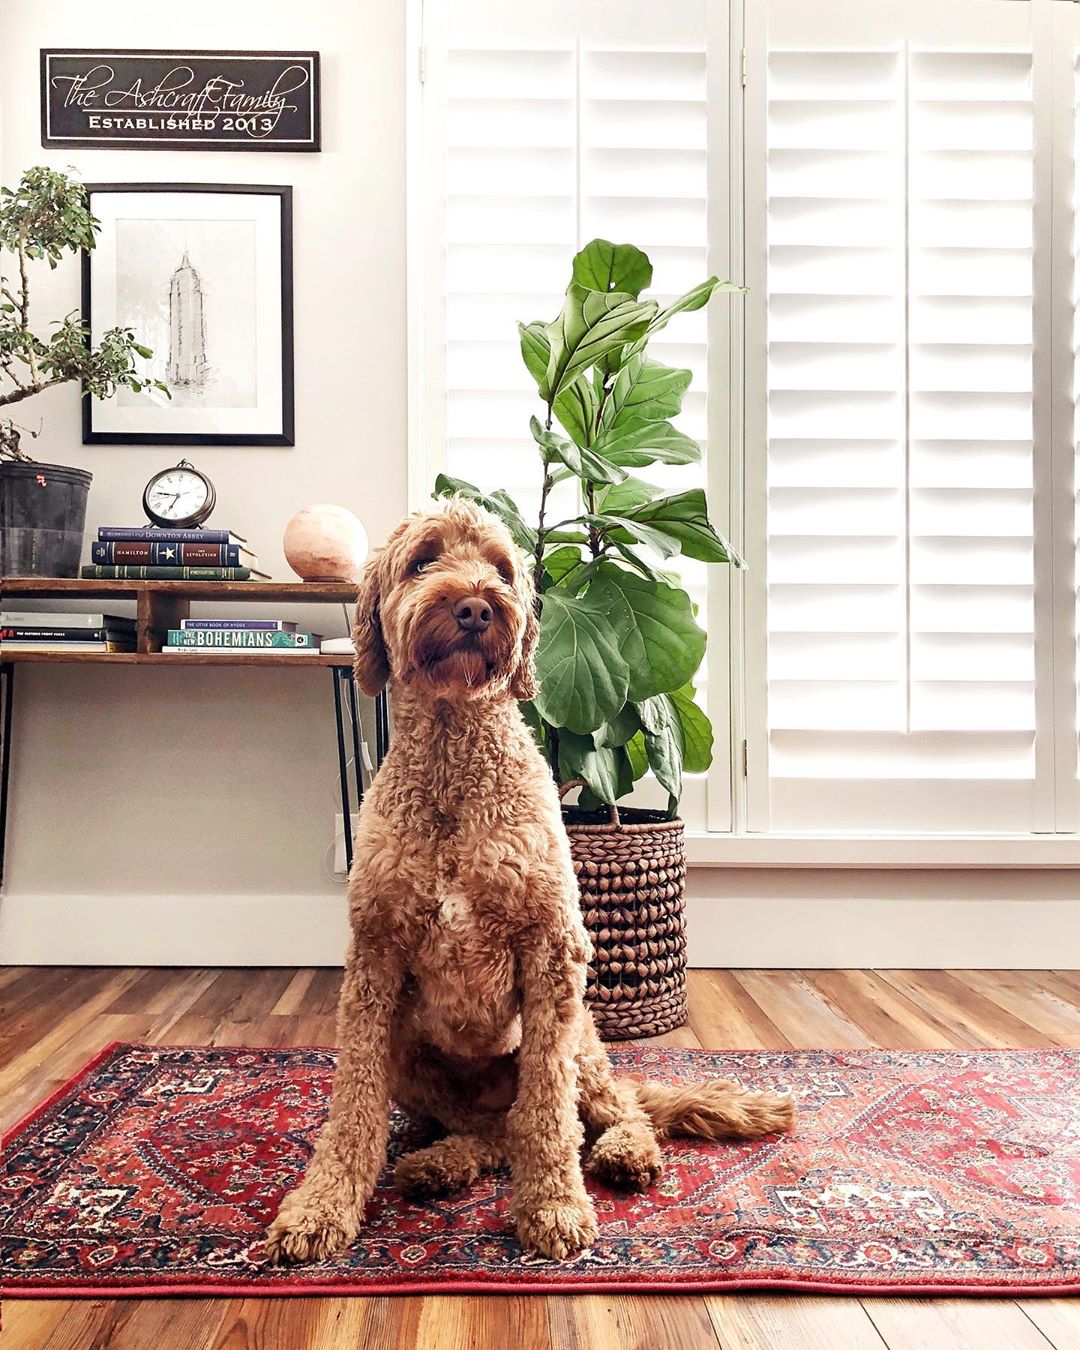 The Best Rug Materials in a Home with Pets in Asheville, NC